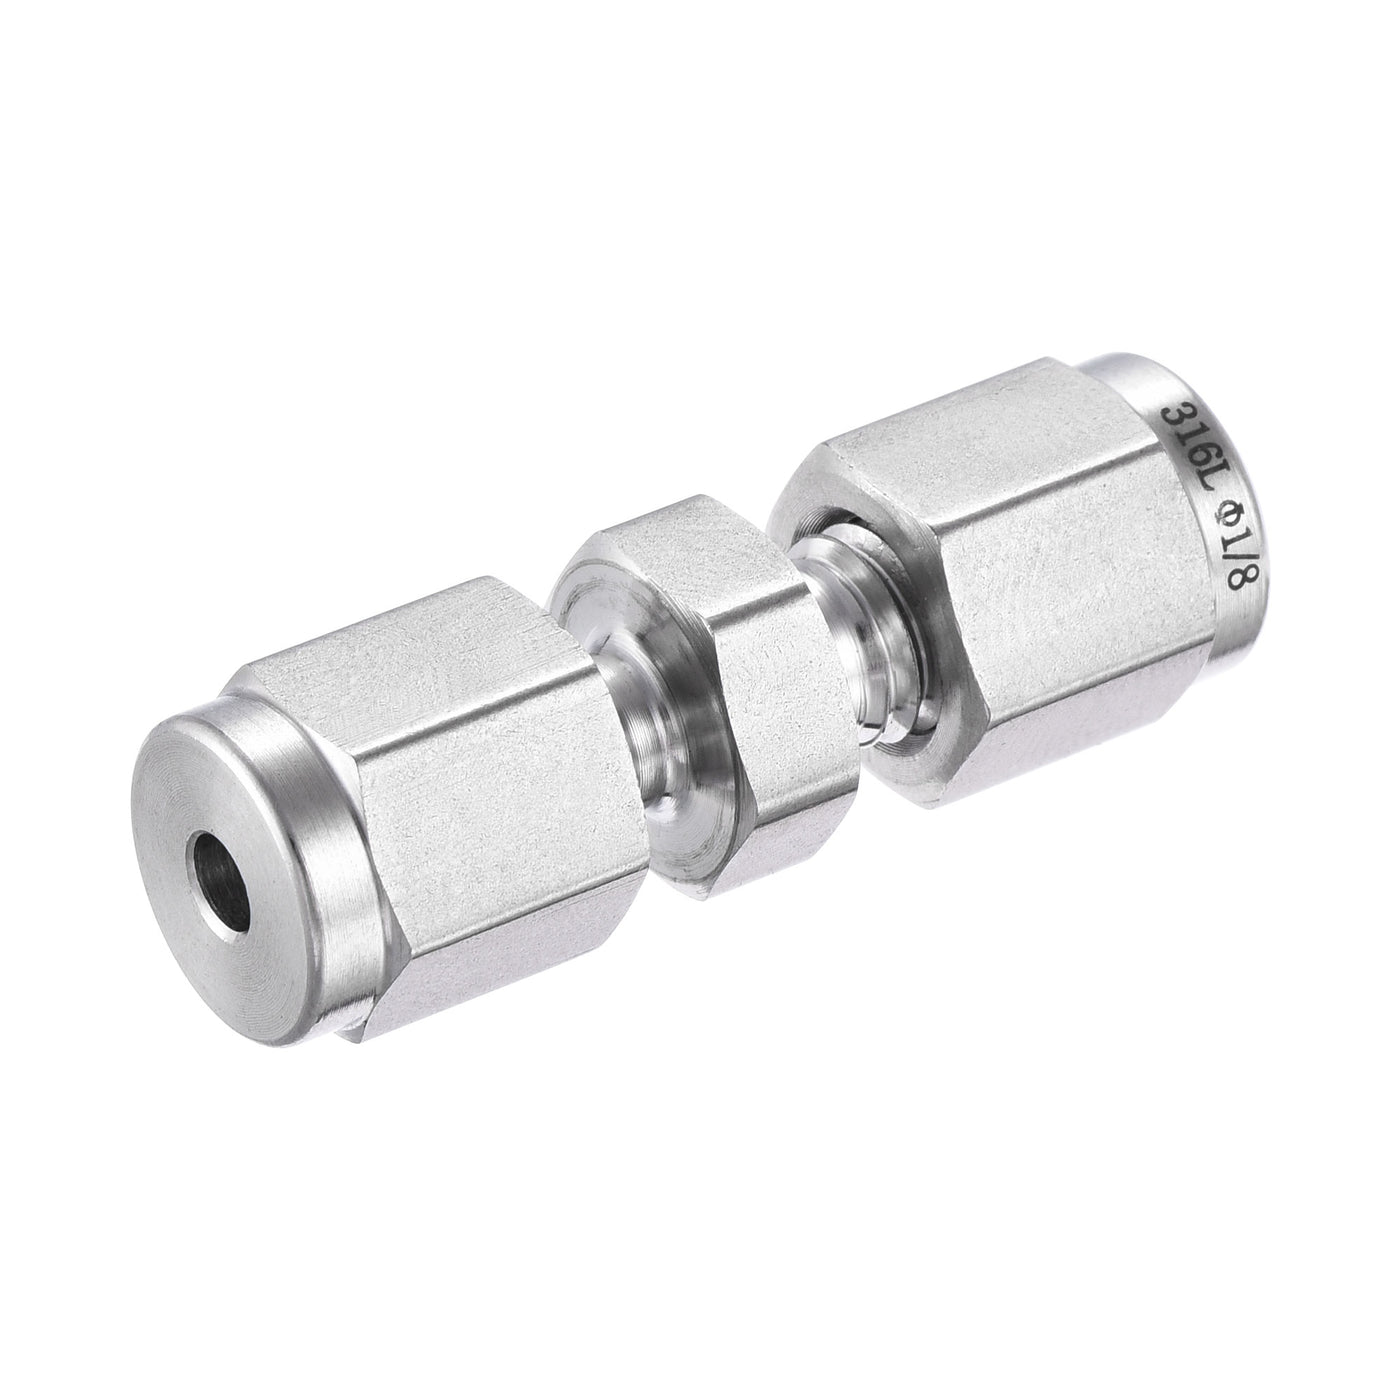 Uxcell Uxcell Compression Tube Fitting 1/8" Tube OD x 1/8" Tube OD Straight Coupling Adapter 316 Stainless Steel